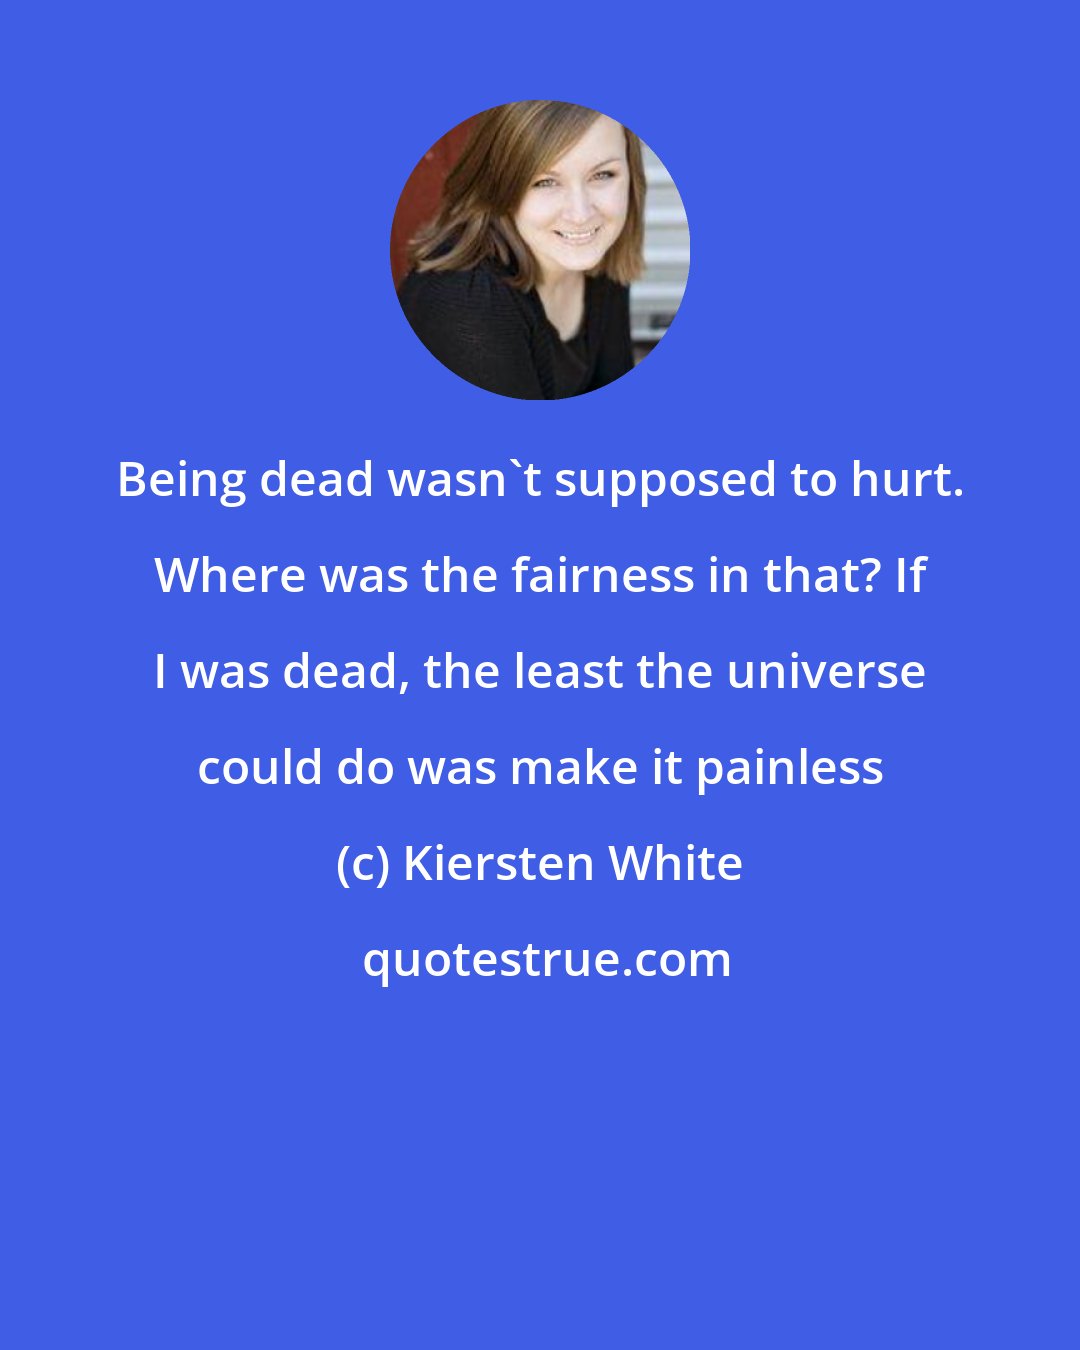 Kiersten White: Being dead wasn't supposed to hurt. Where was the fairness in that? If I was dead, the least the universe could do was make it painless